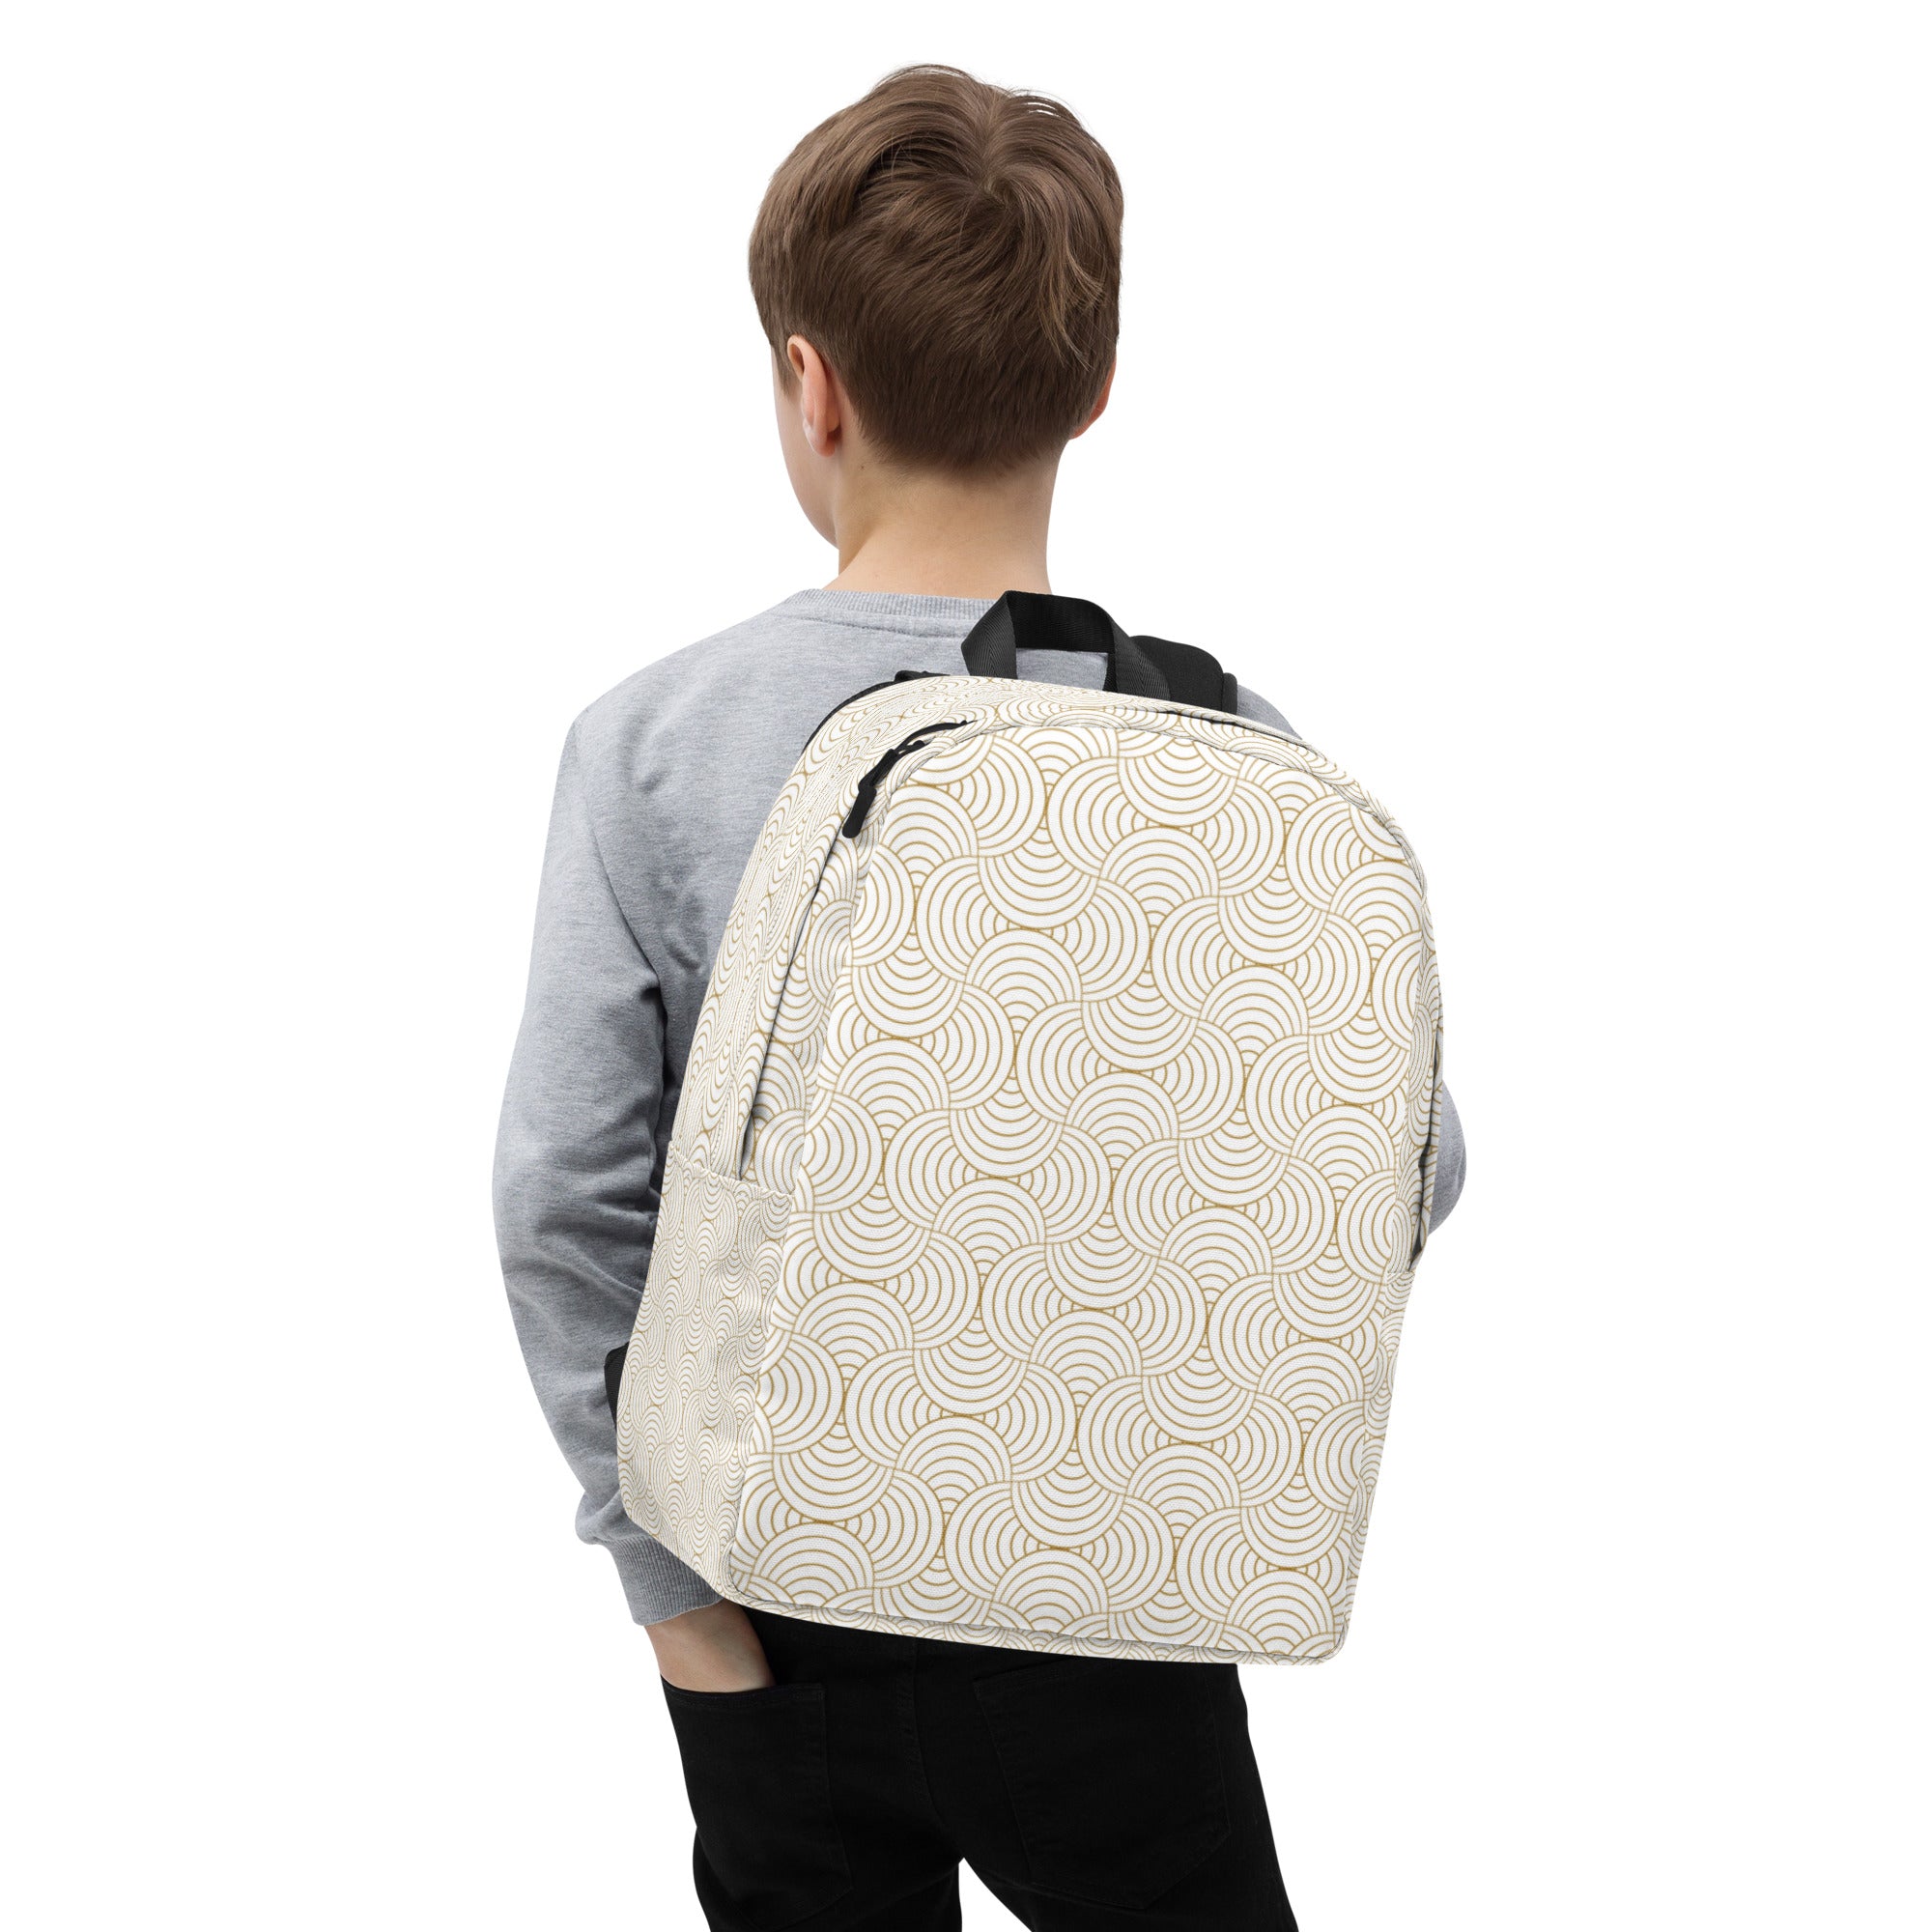 Minimalist Backpack, Backpack, Back to School. Weekend, Gym, Camping, Travel, Gift